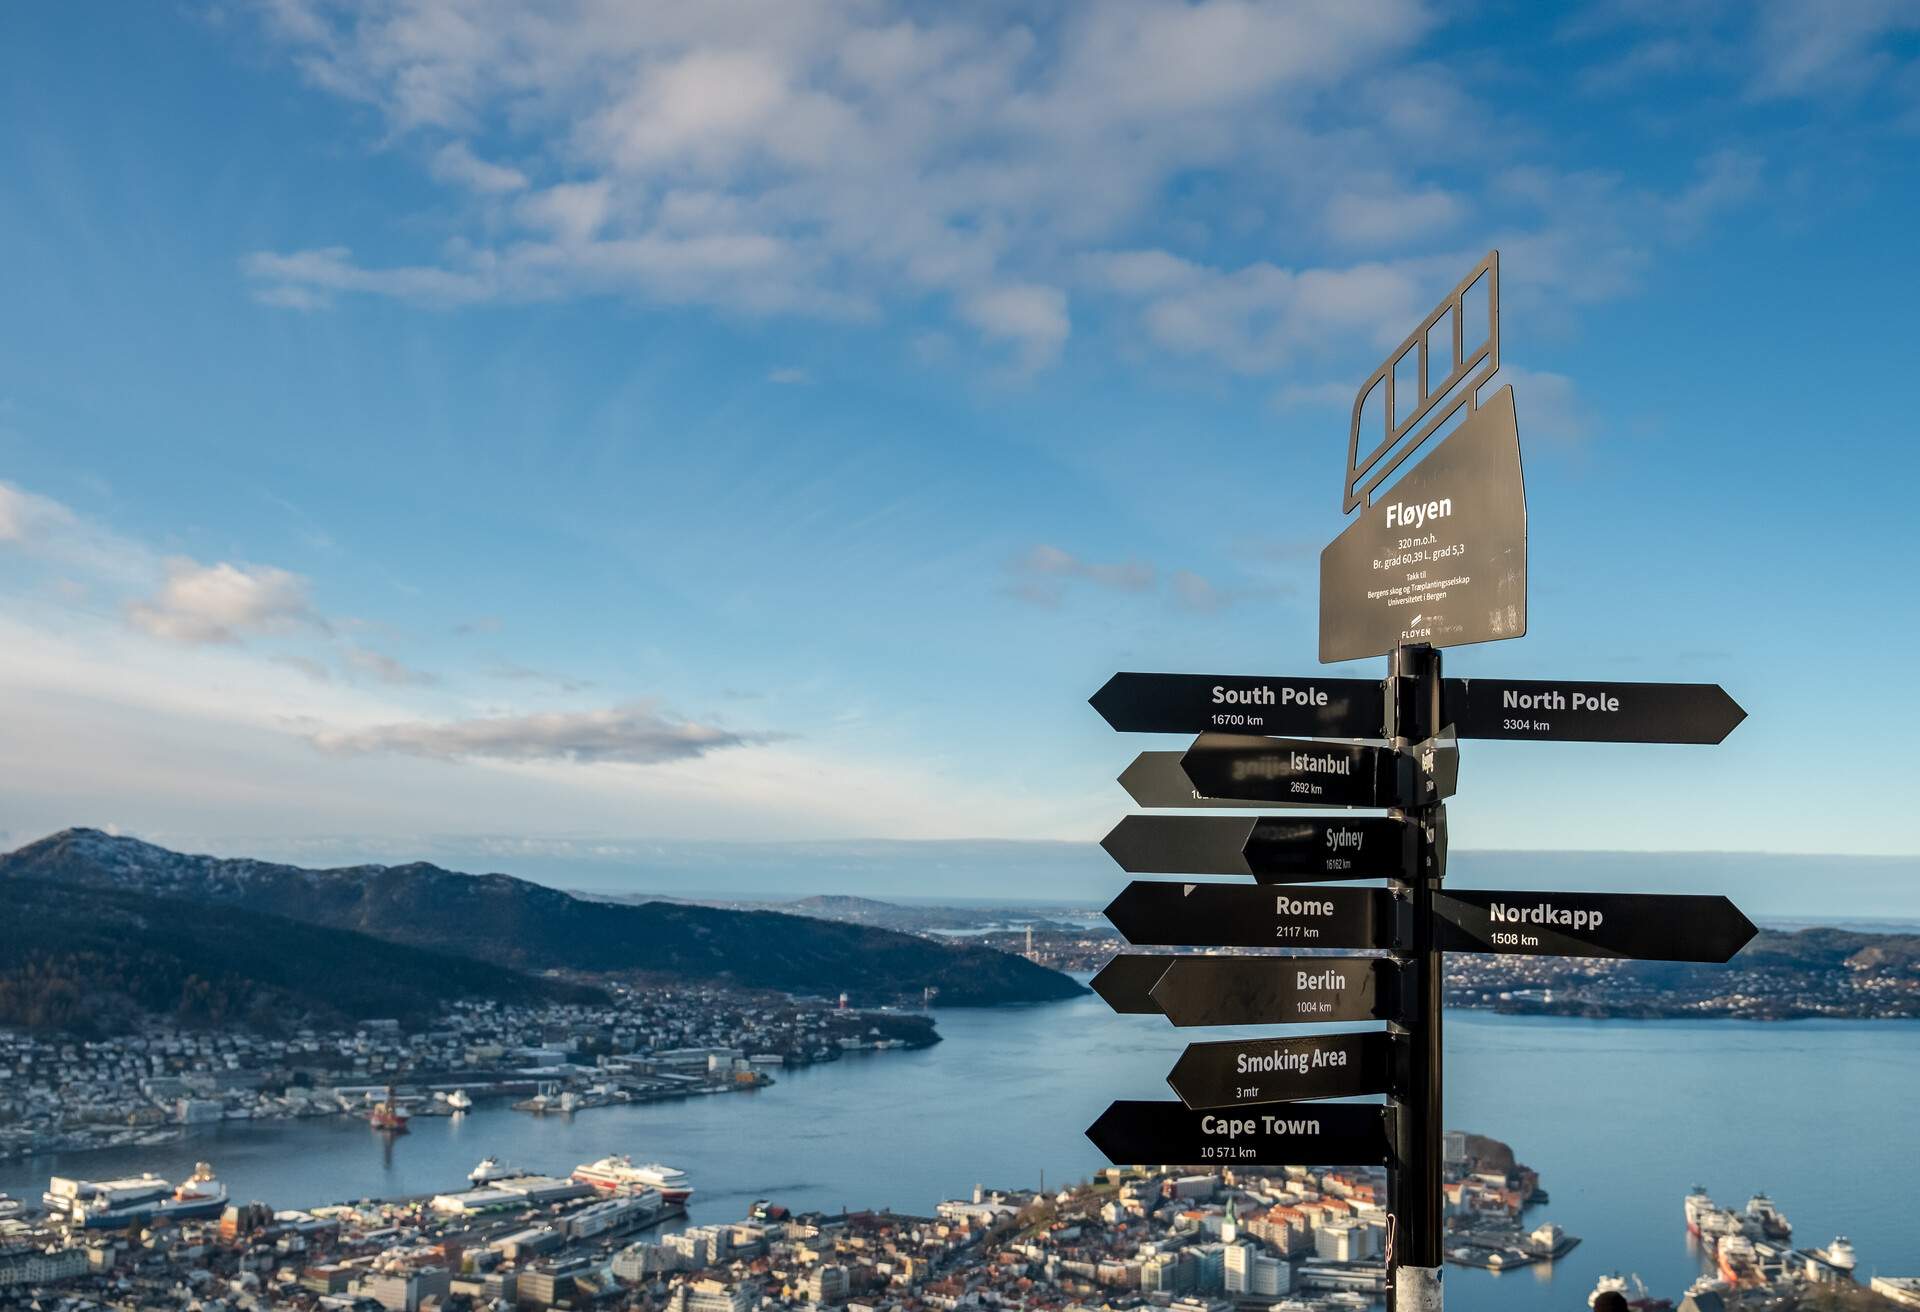 Spectacular view of Bergen from the summit of Mount Fløyen. Taking the Fløibanen funicular railway to the viewpoint is one of Norway's top attractions.